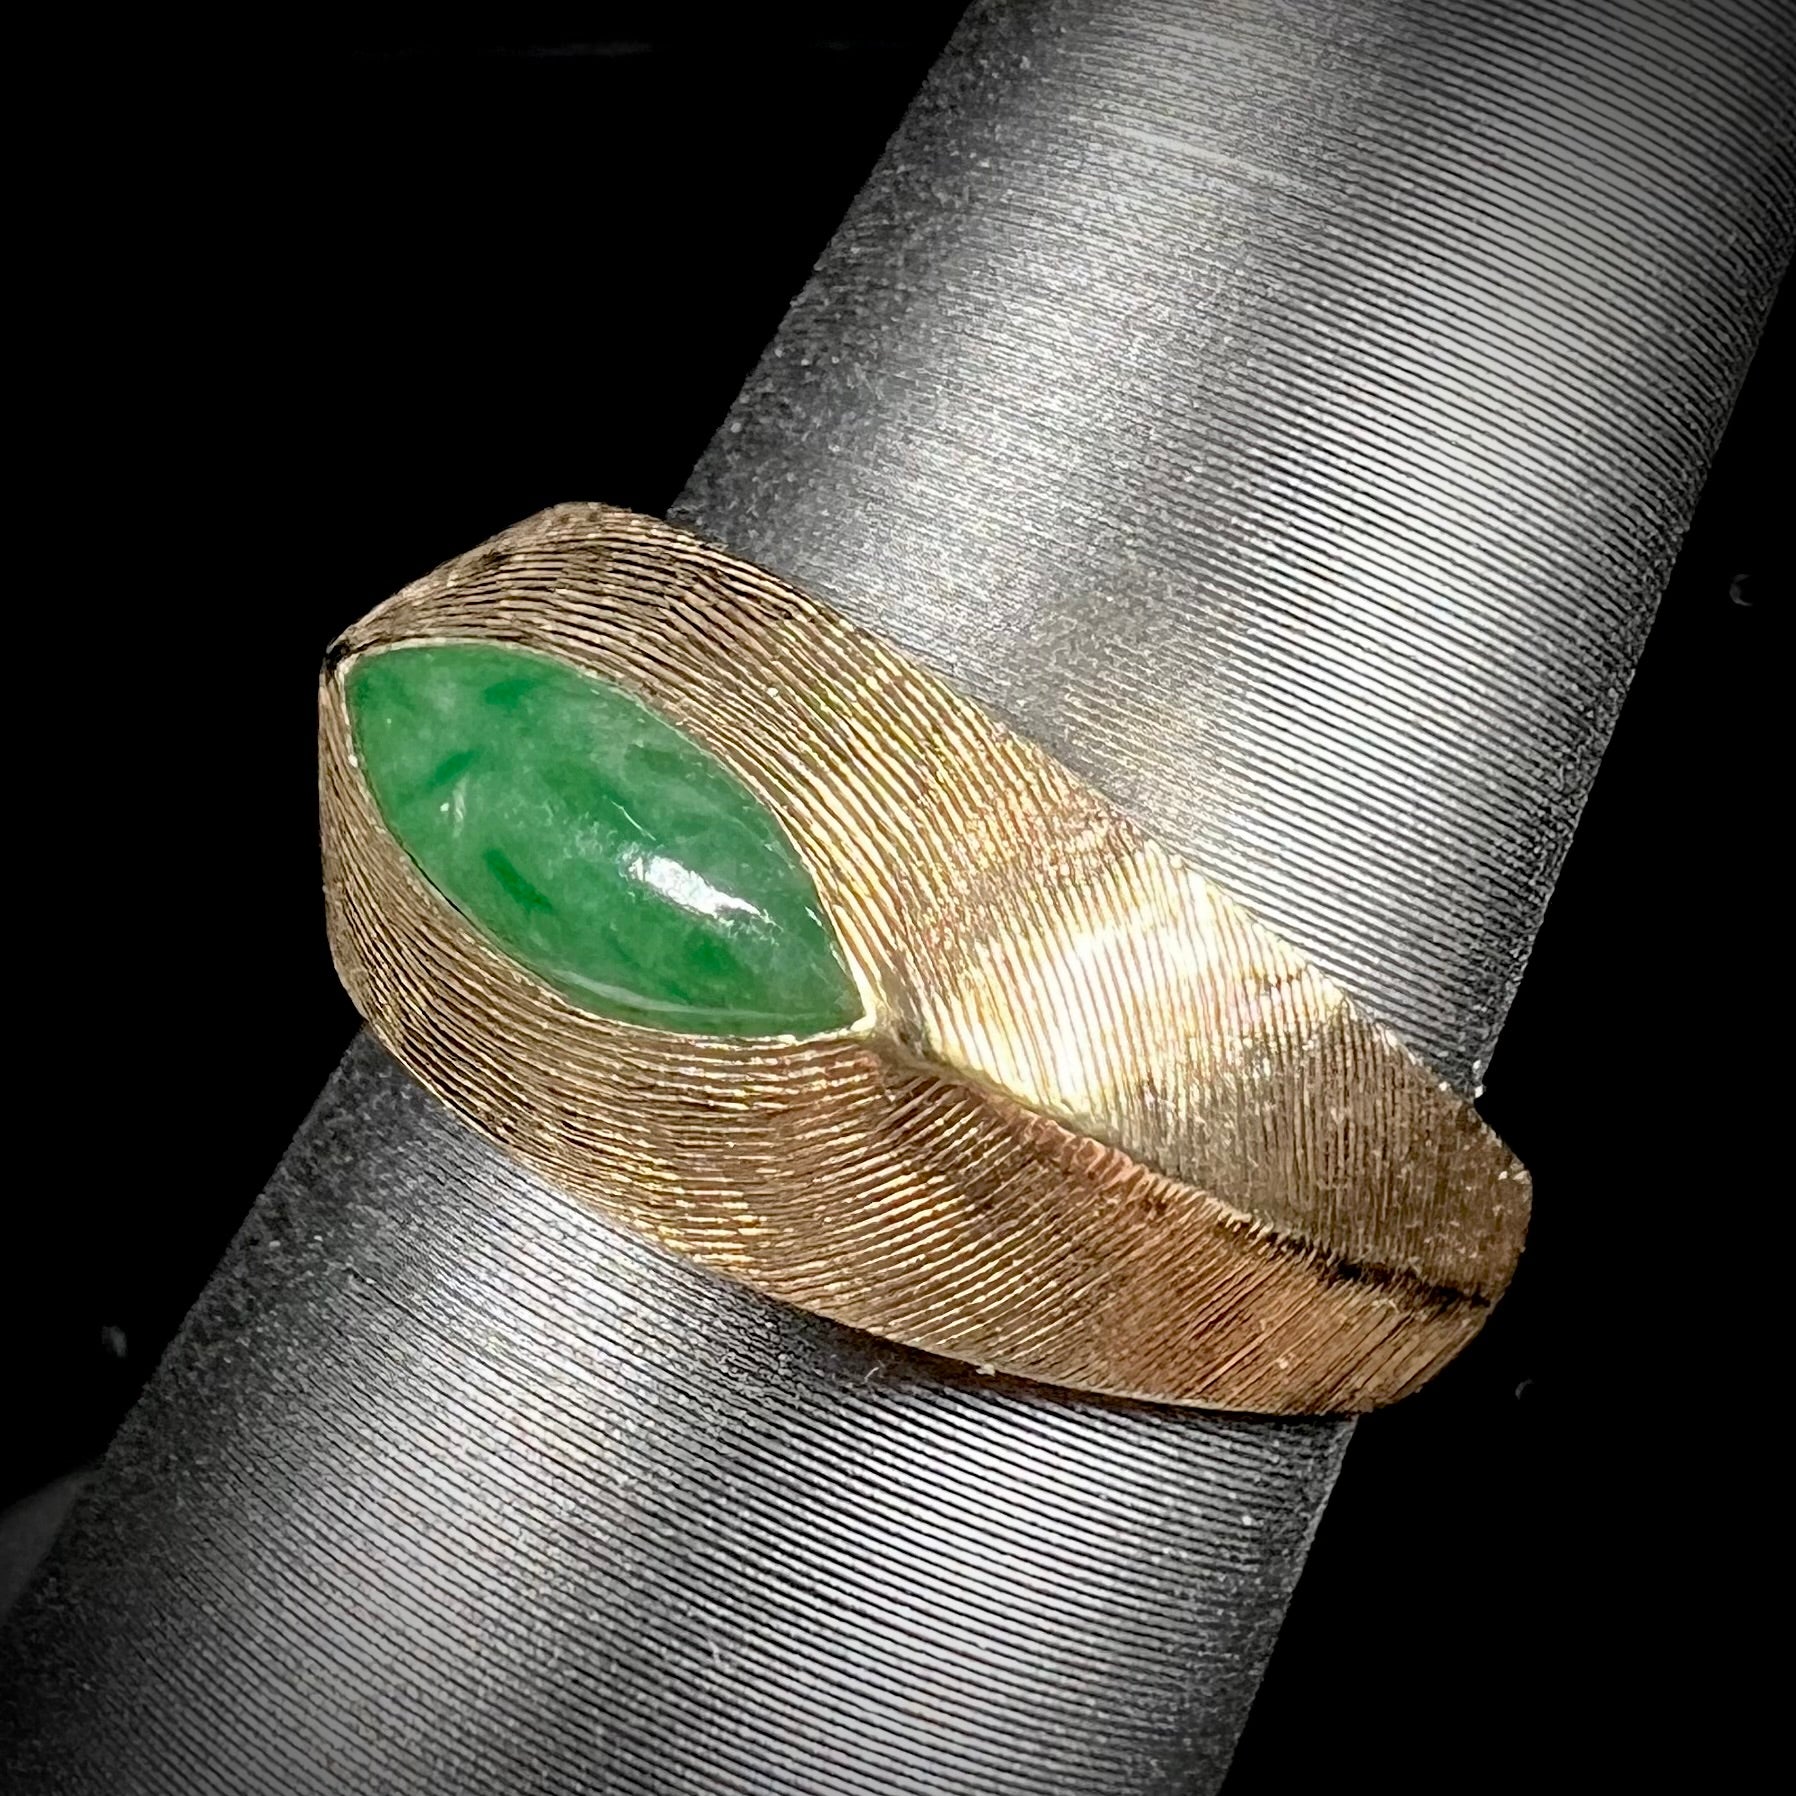 A textured yellow gold ring set with a marquise cabochon cut green jadeite stone.